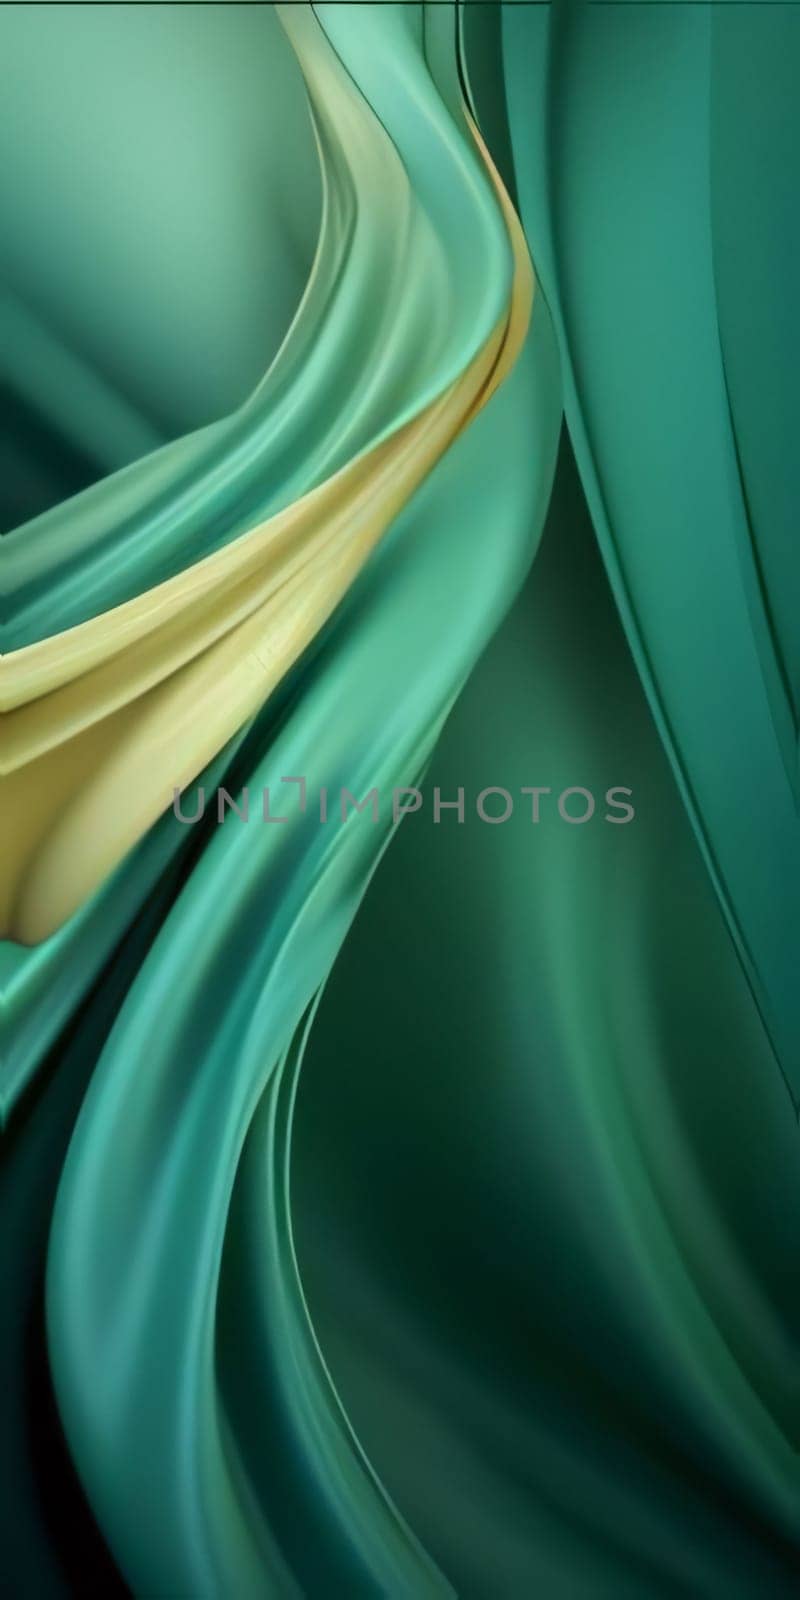 abstract background with green and yellow satin drapery cloth by ThemesS